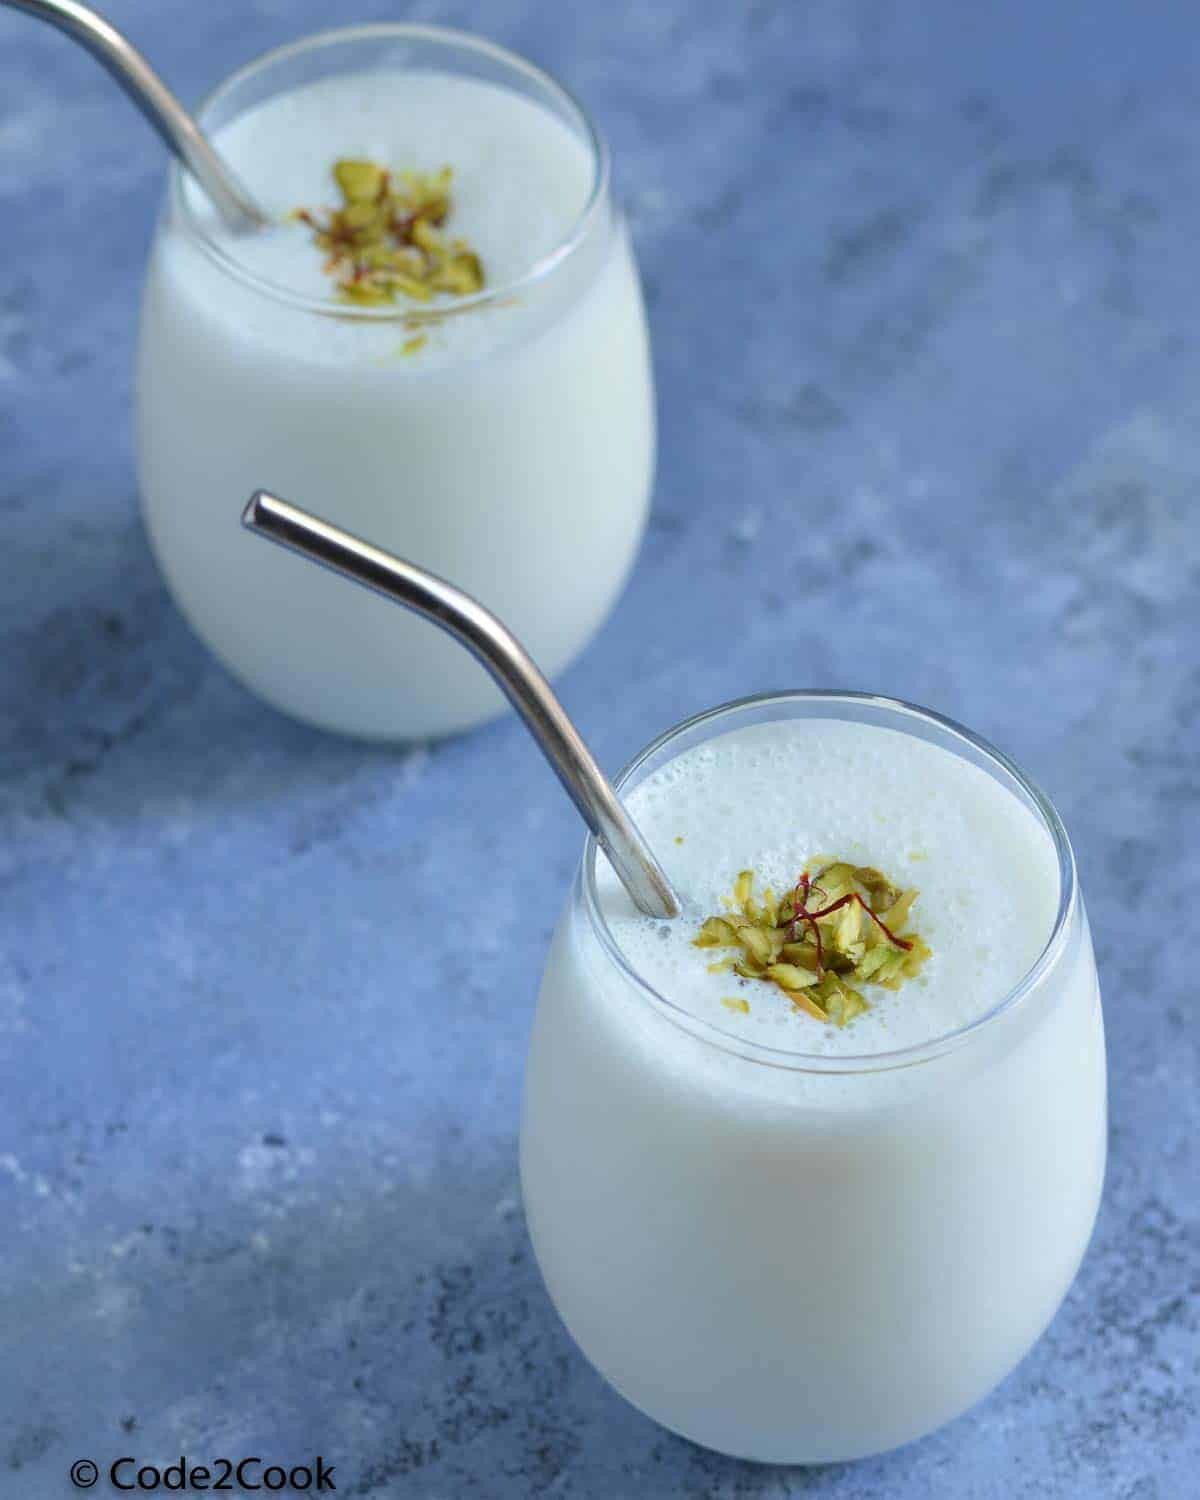 Lassi served in glasses, garnished with dry fruits